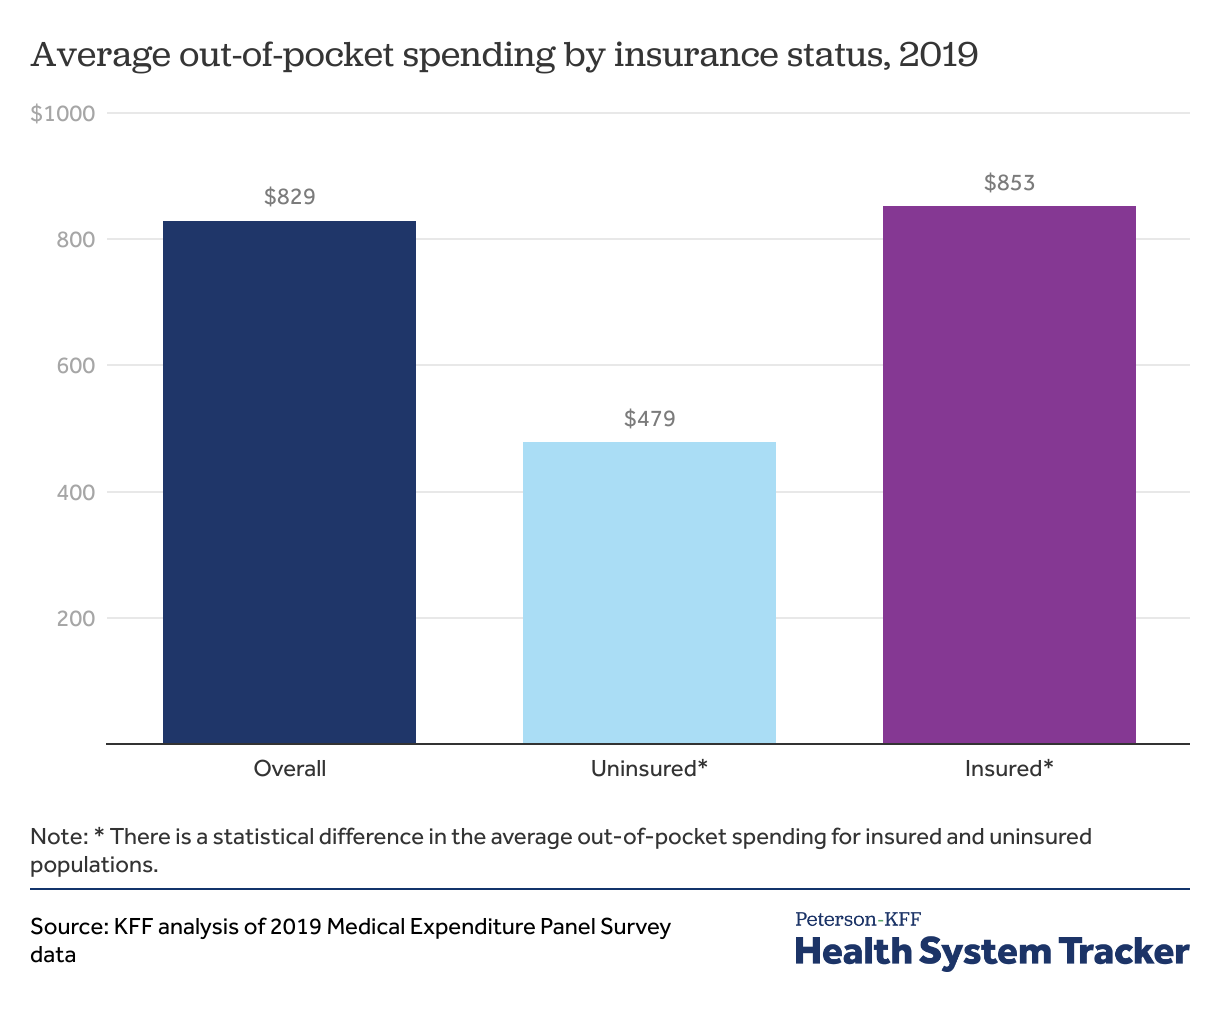 Out-of-pocket spending - Peterson-KFF Health System Tracker